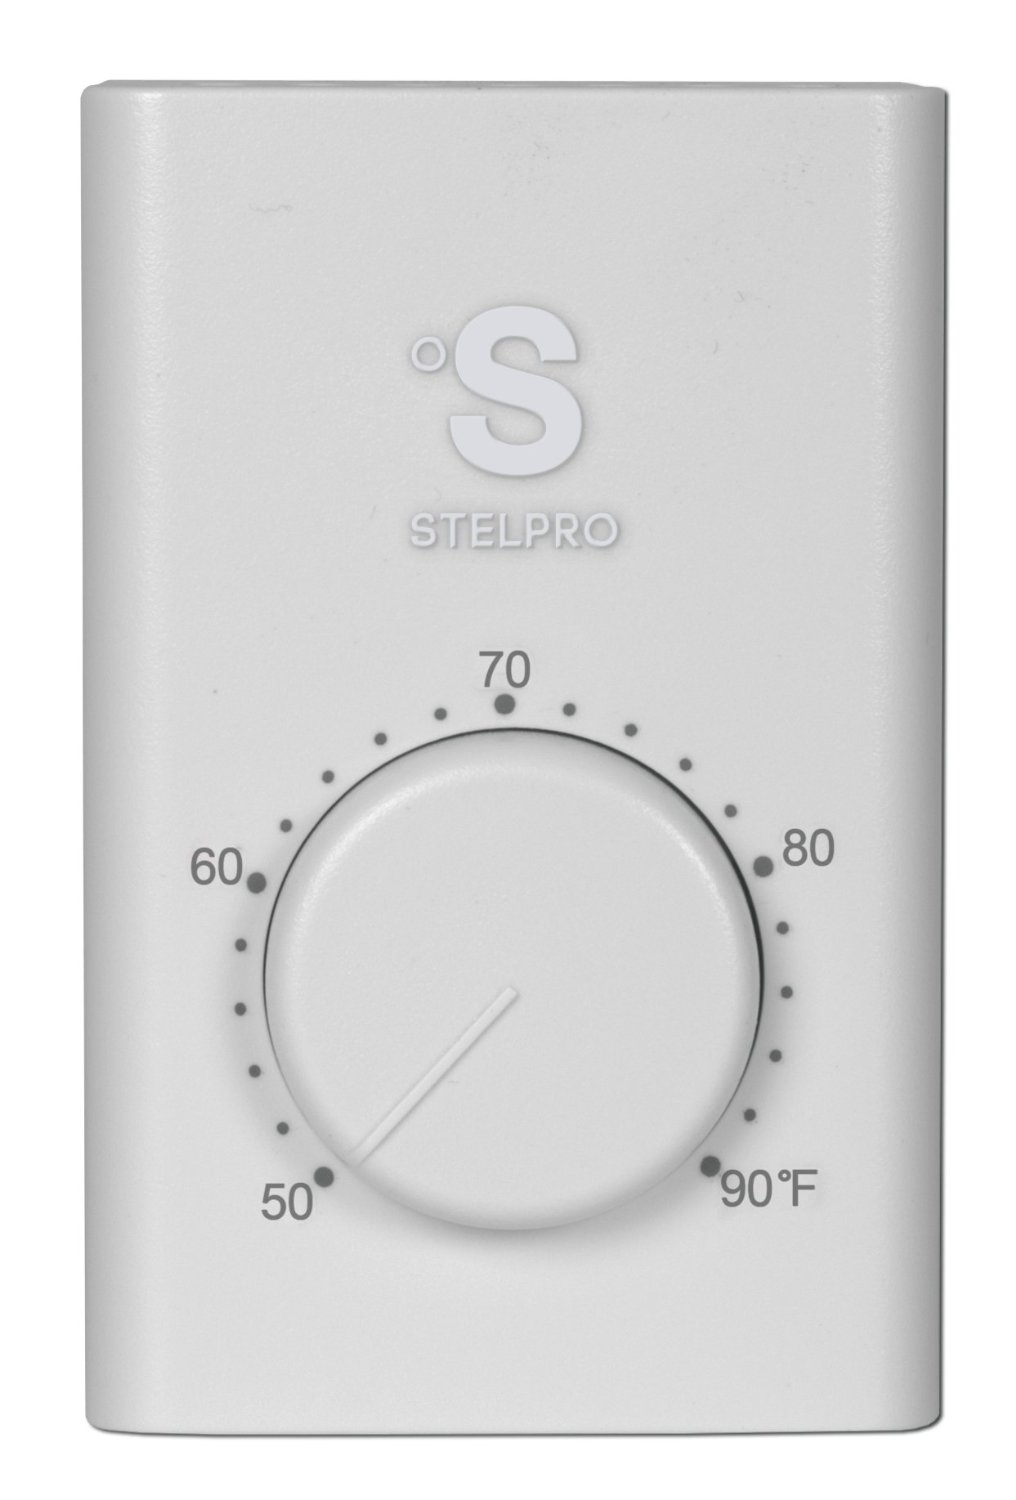 Stelpro Built-in Thermostat, Single Pole, 120-600V, White (Stelpro